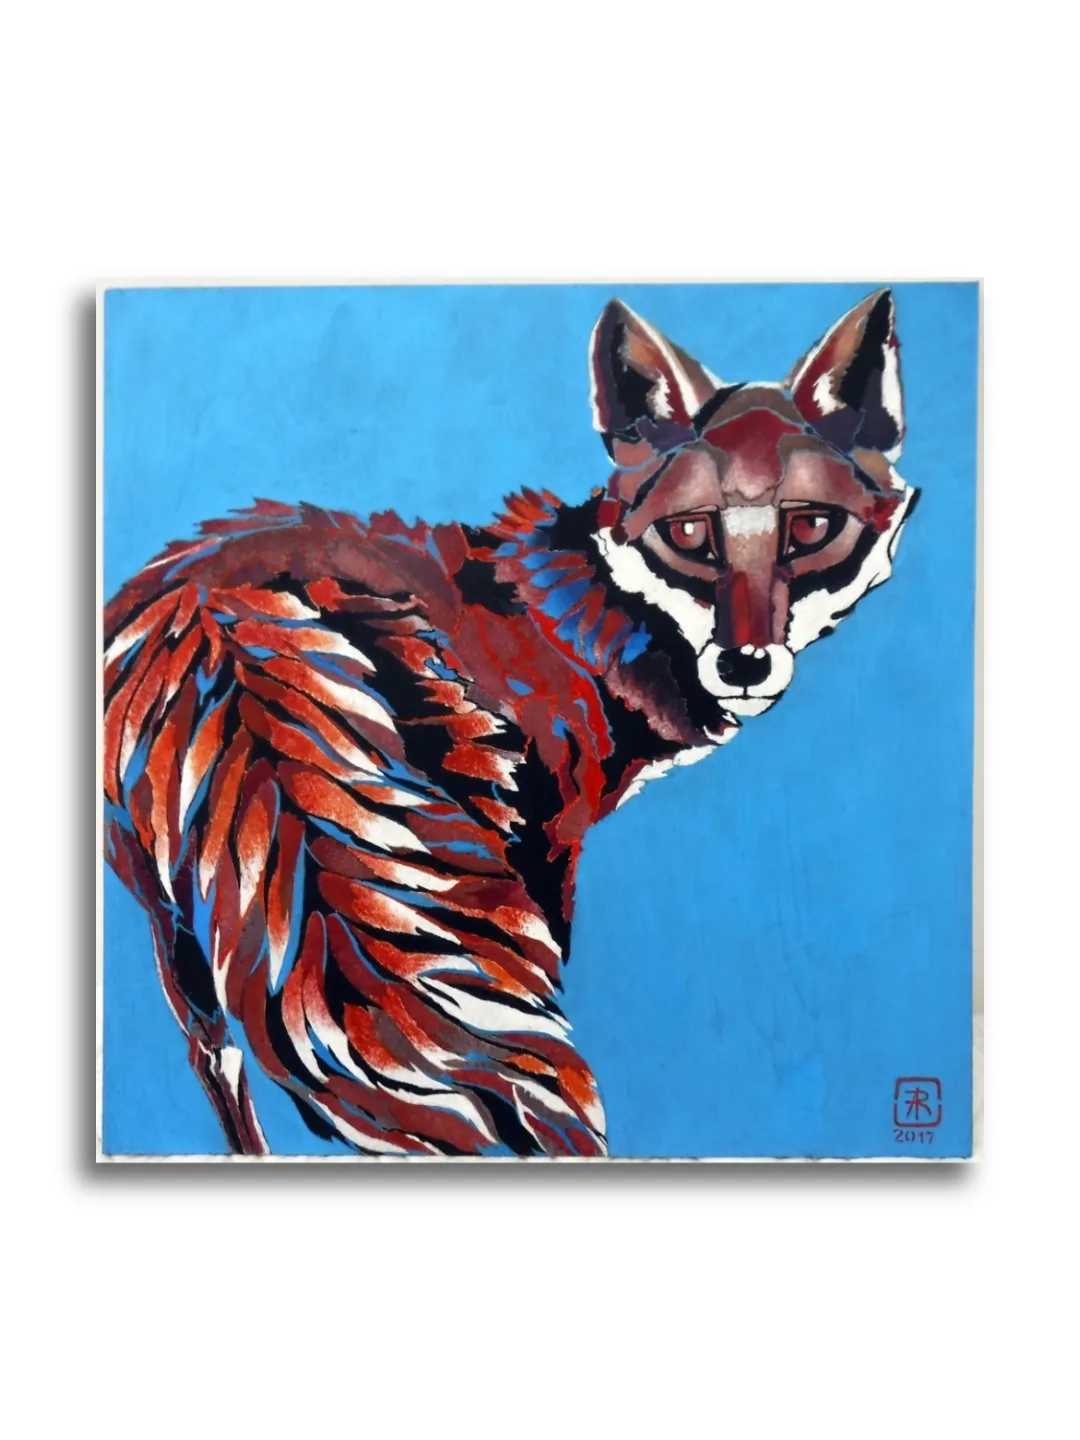 Turning Fox #3 by Ann Richmond - A stunning, Original stencilled artwork featuring a Fox. Painted in the artist's unique style... Framing available.